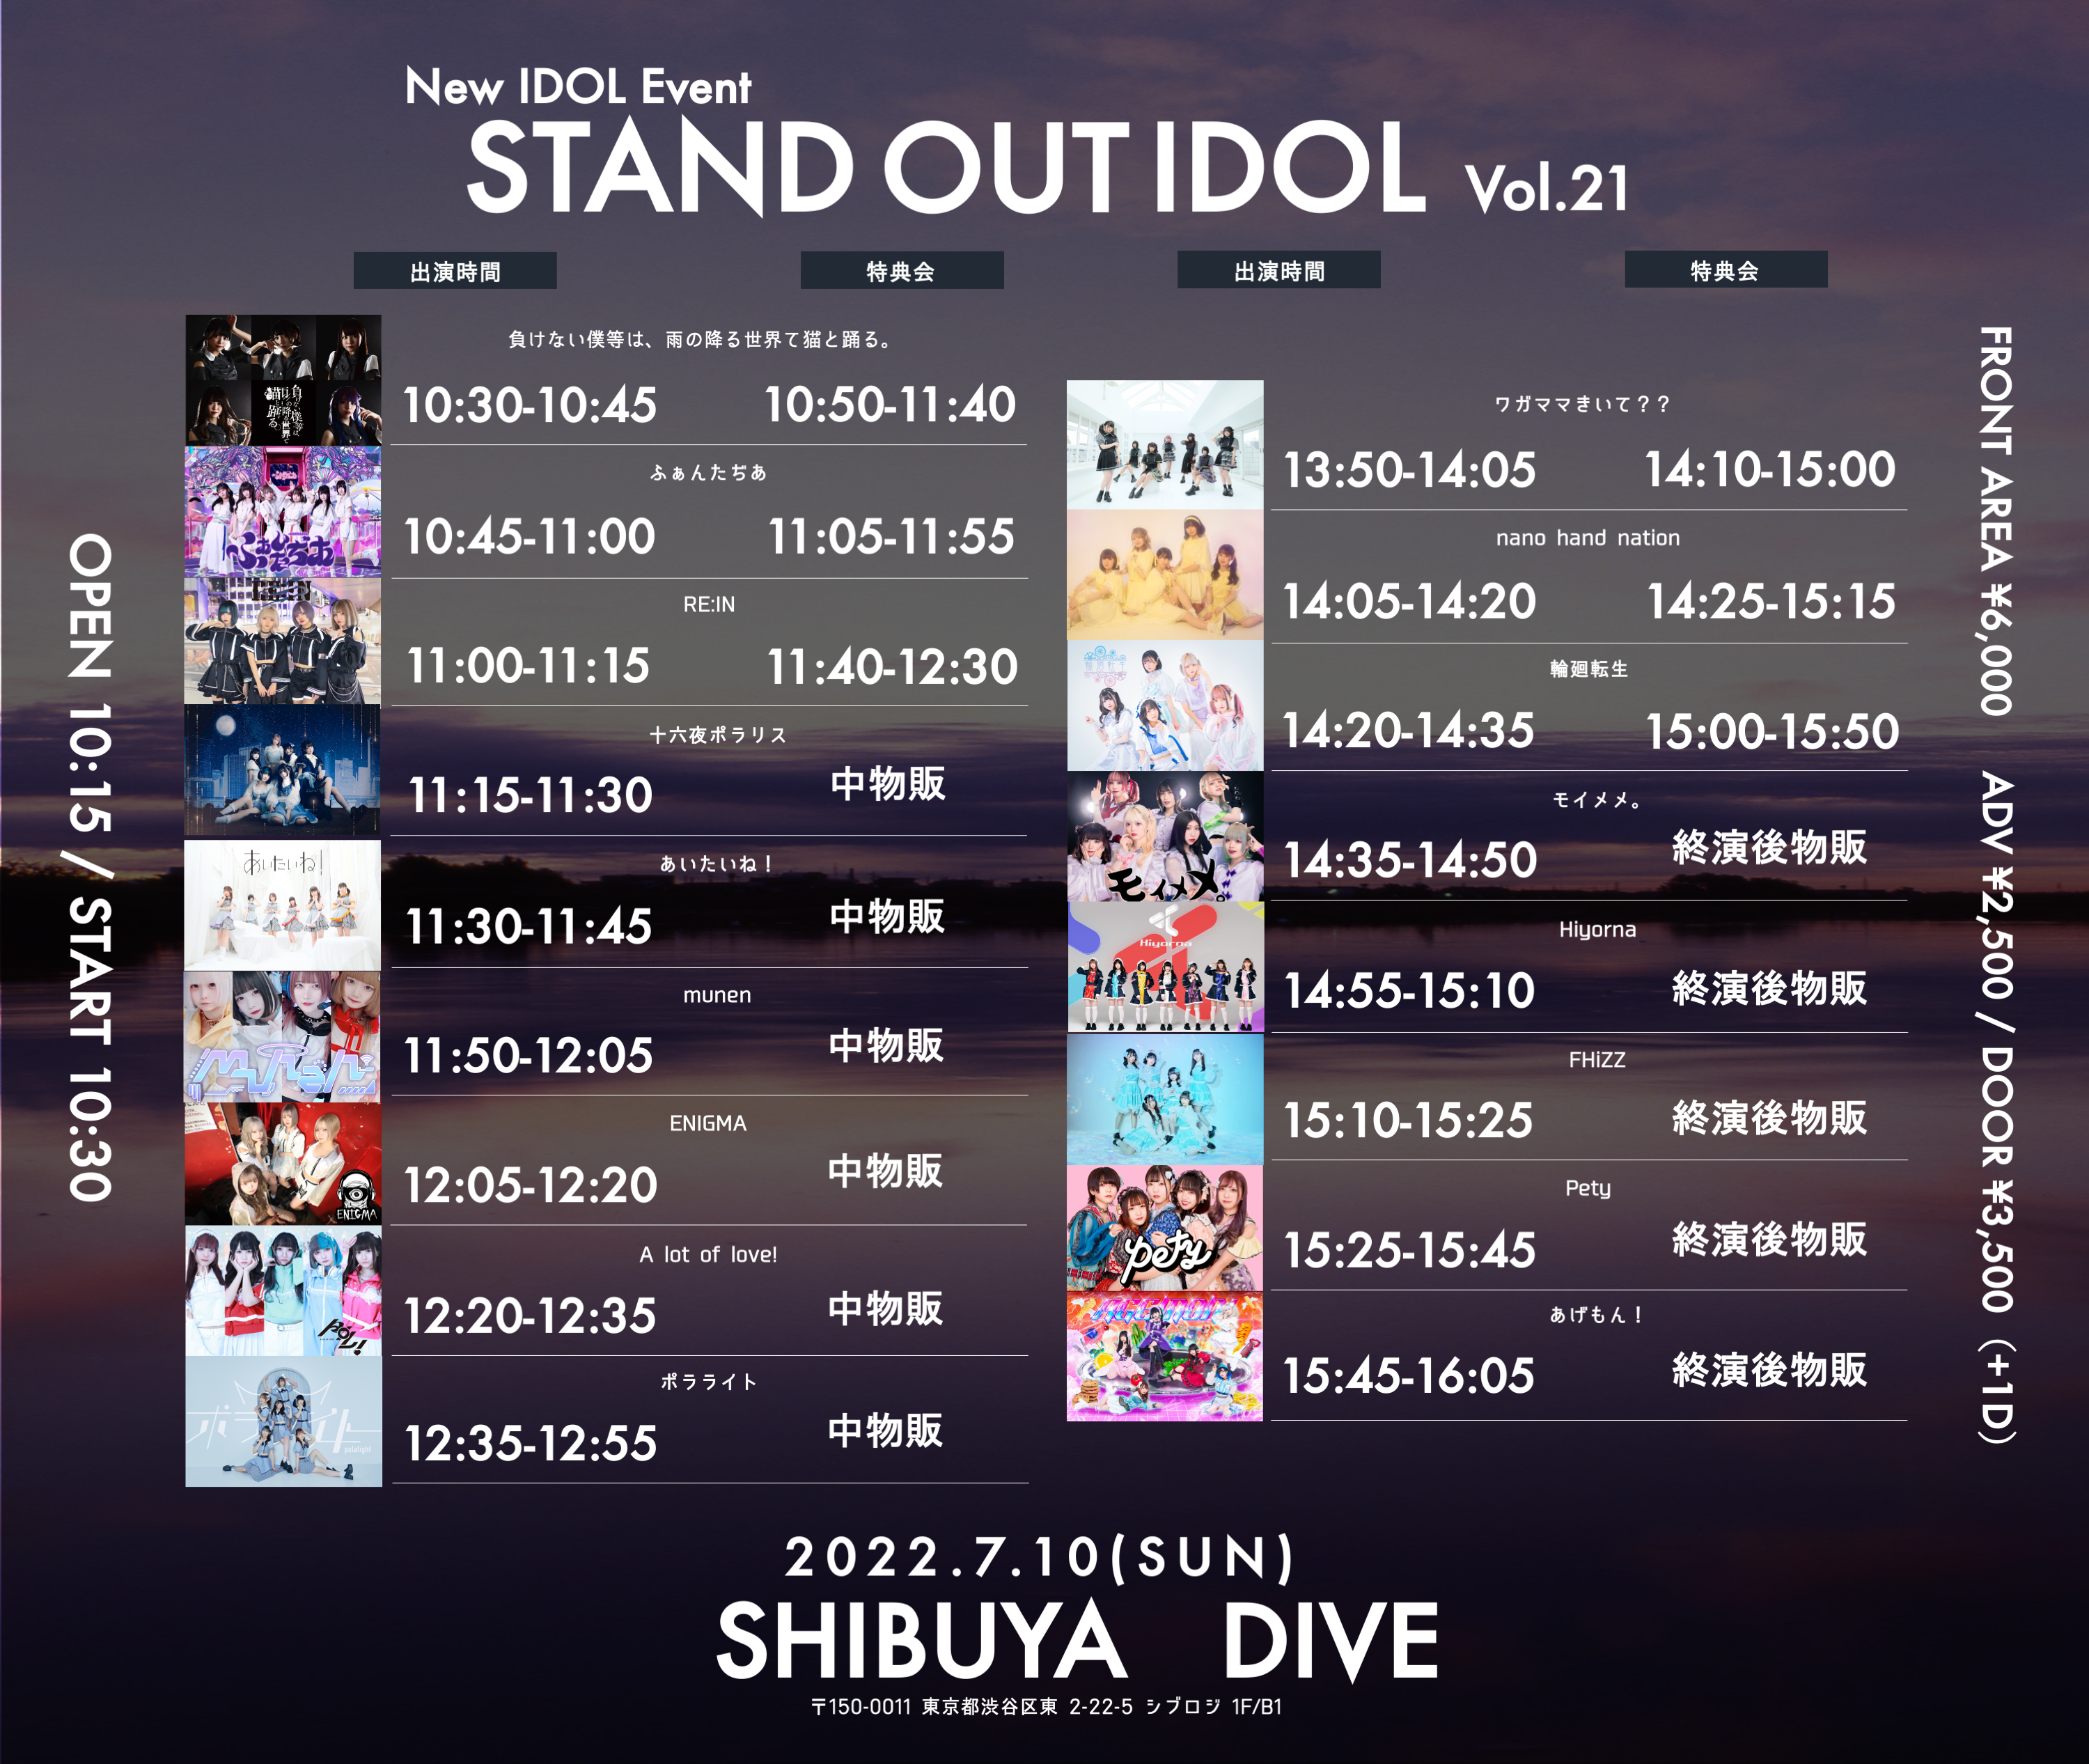 STAND OUT IDOL Vol.21